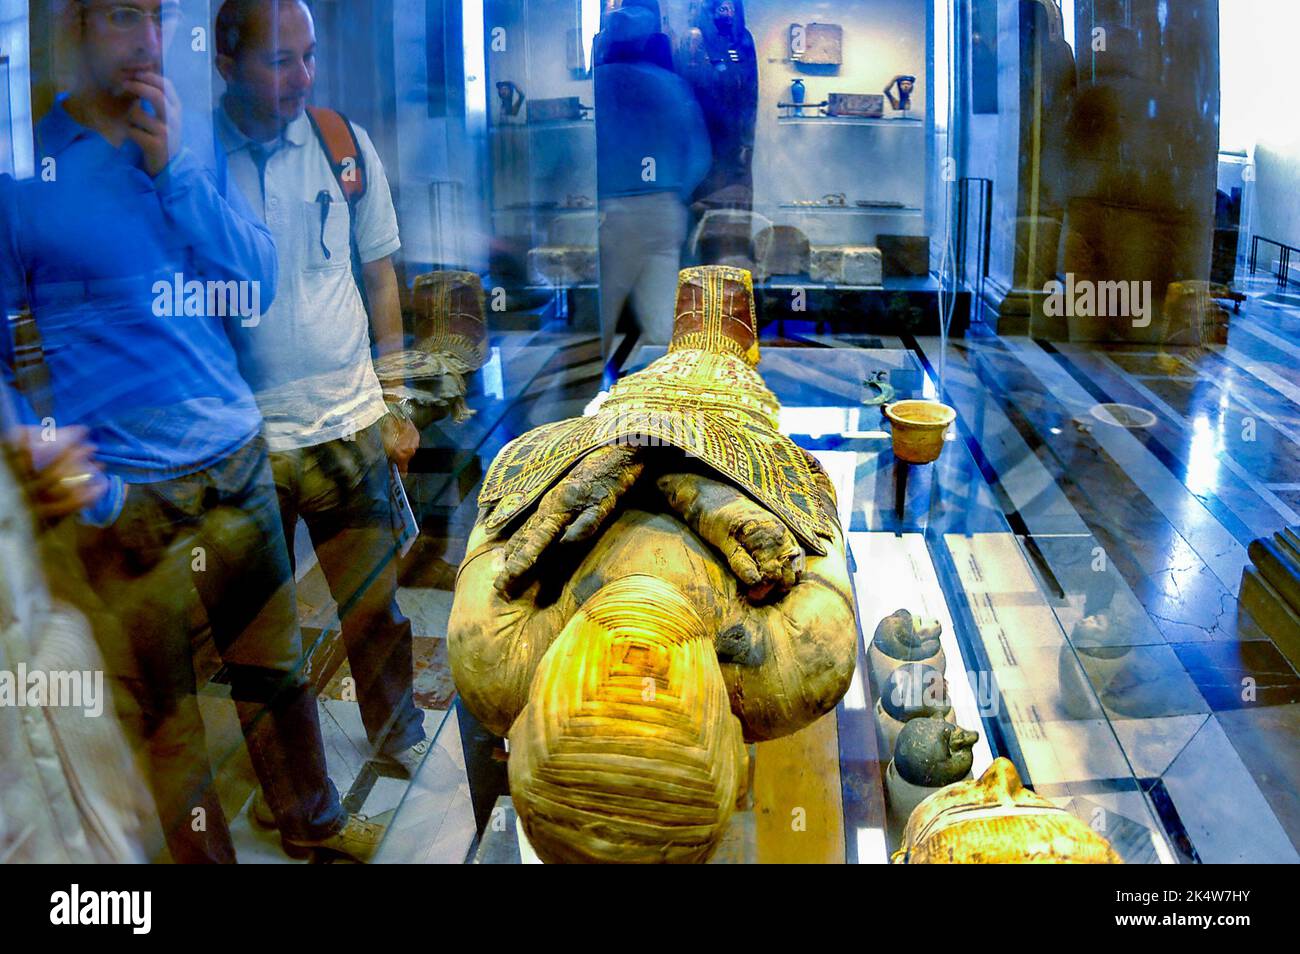 PARIS, France  - Tourists in Louvre Museum, Egyptian Dept. Collection, Looking at an Ancient Mummy. on display in Case, ramses II paris, ancient civilisation art Stock Photo